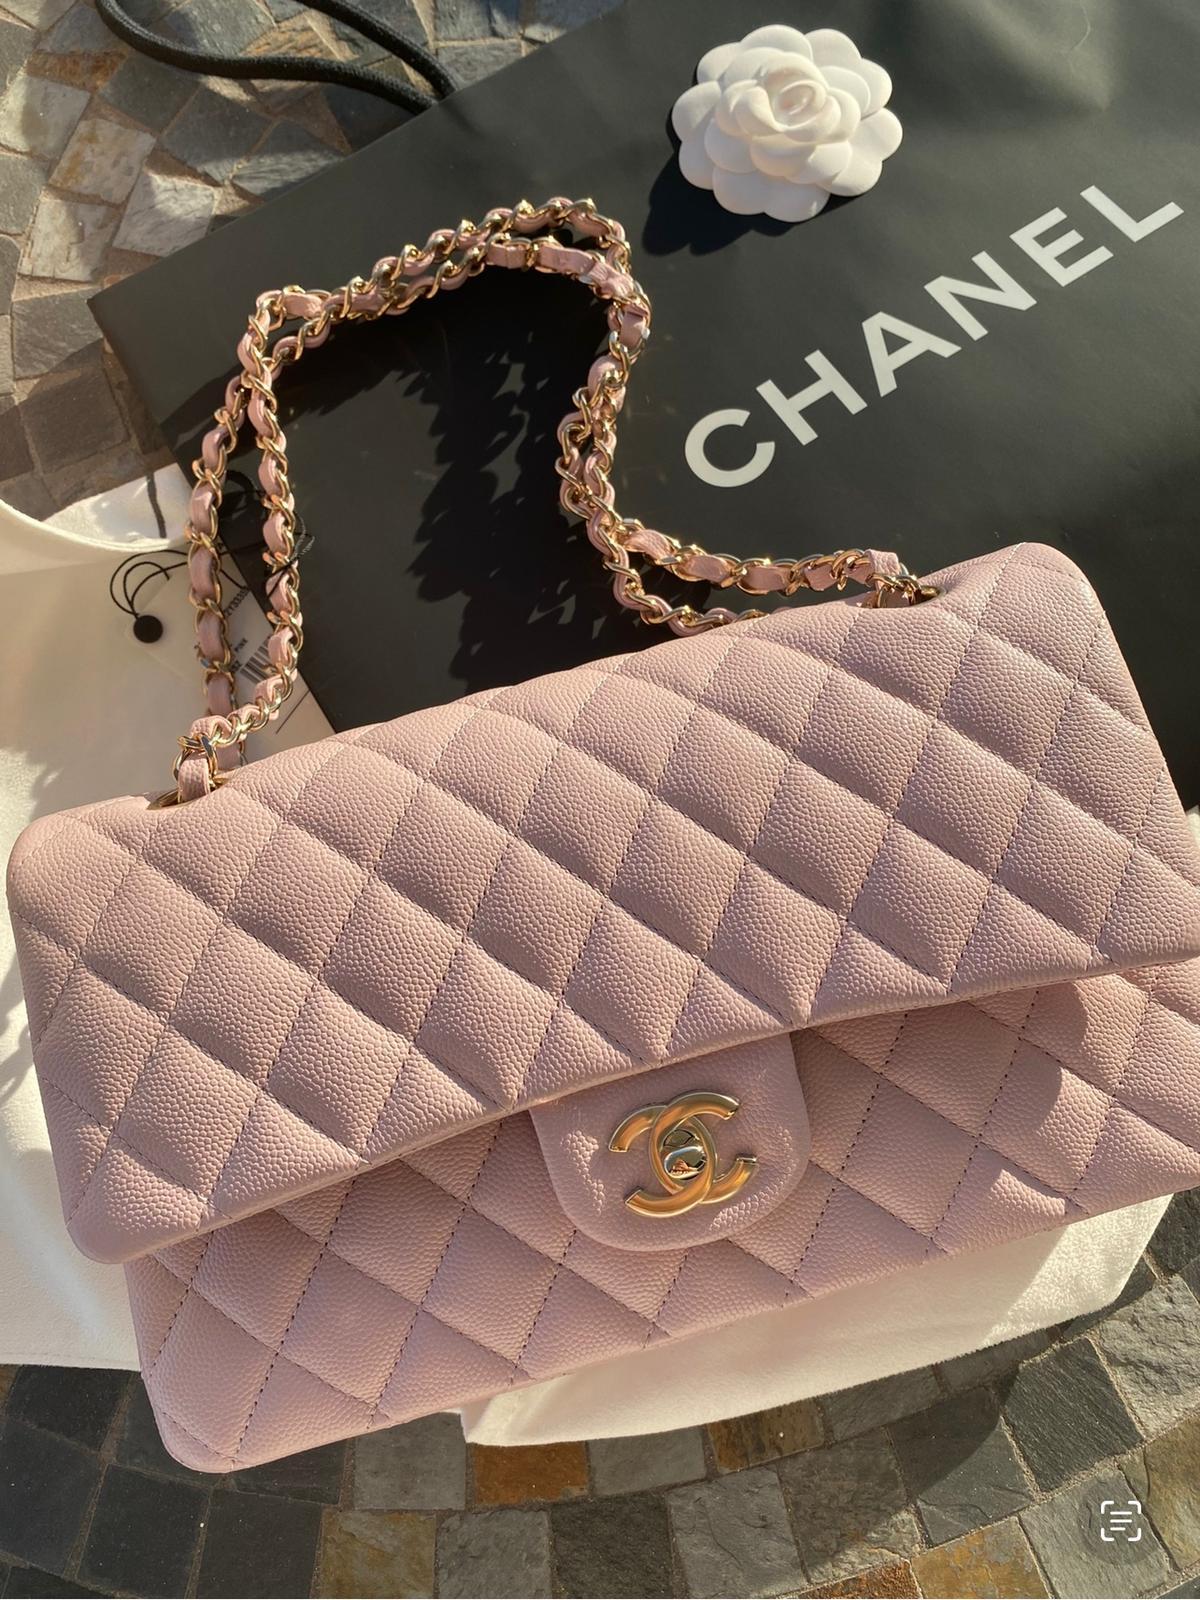 A Classic Chanel Handbag Will Now Cost You 10000  Fashionista